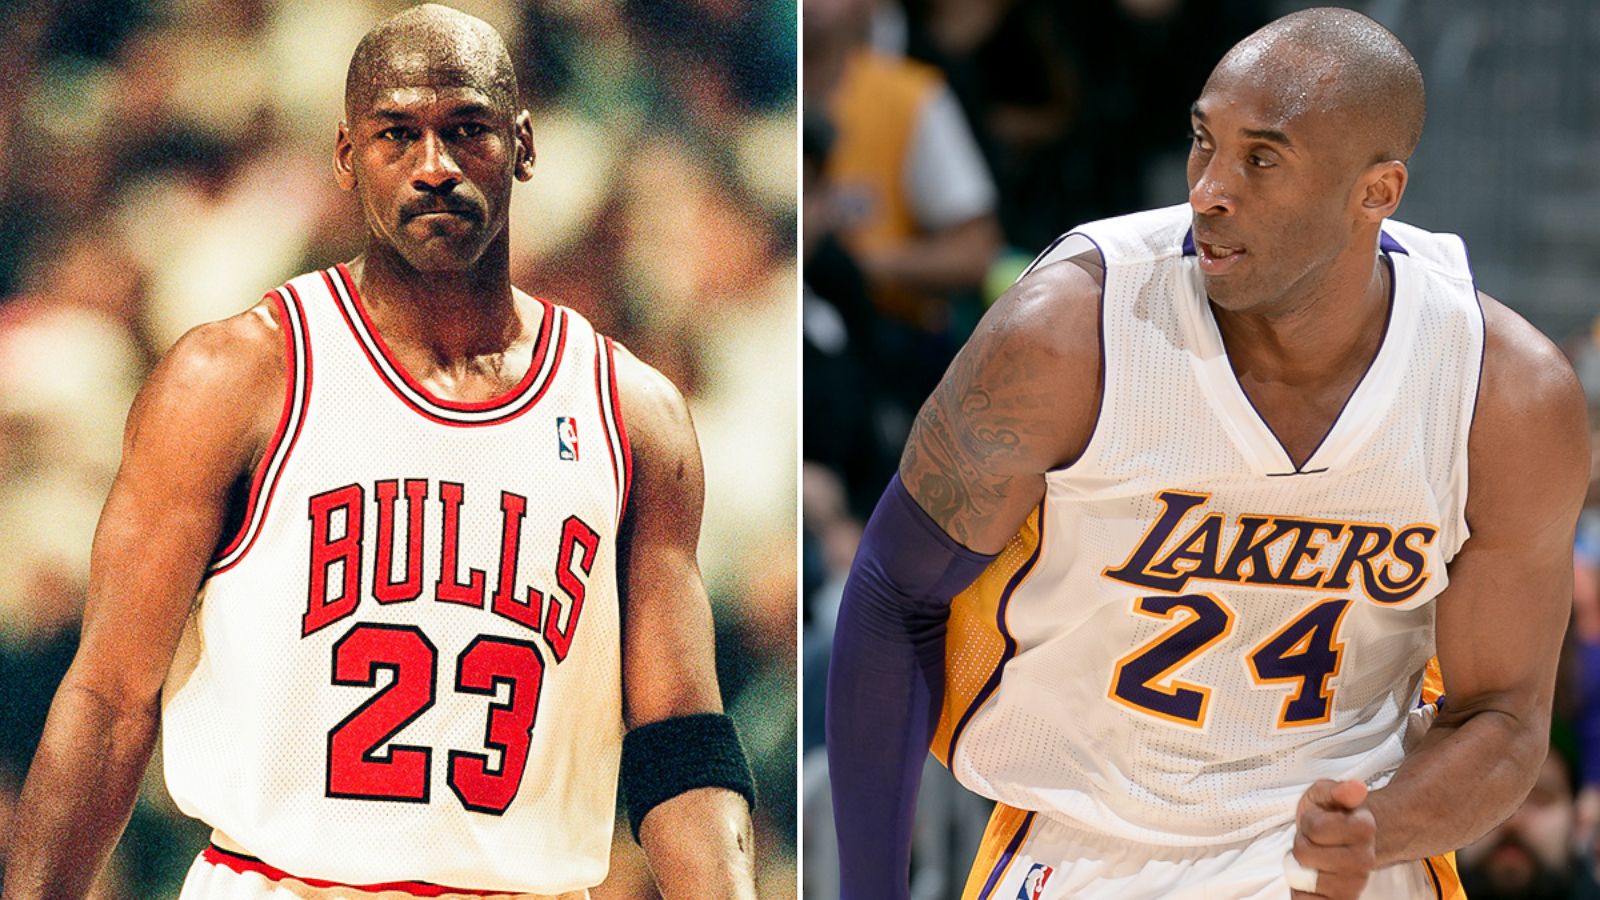 Michael Jordan, Kobe Bryant's Meditation Coach on How to Be 'Flow Ready' and Get in the Zone